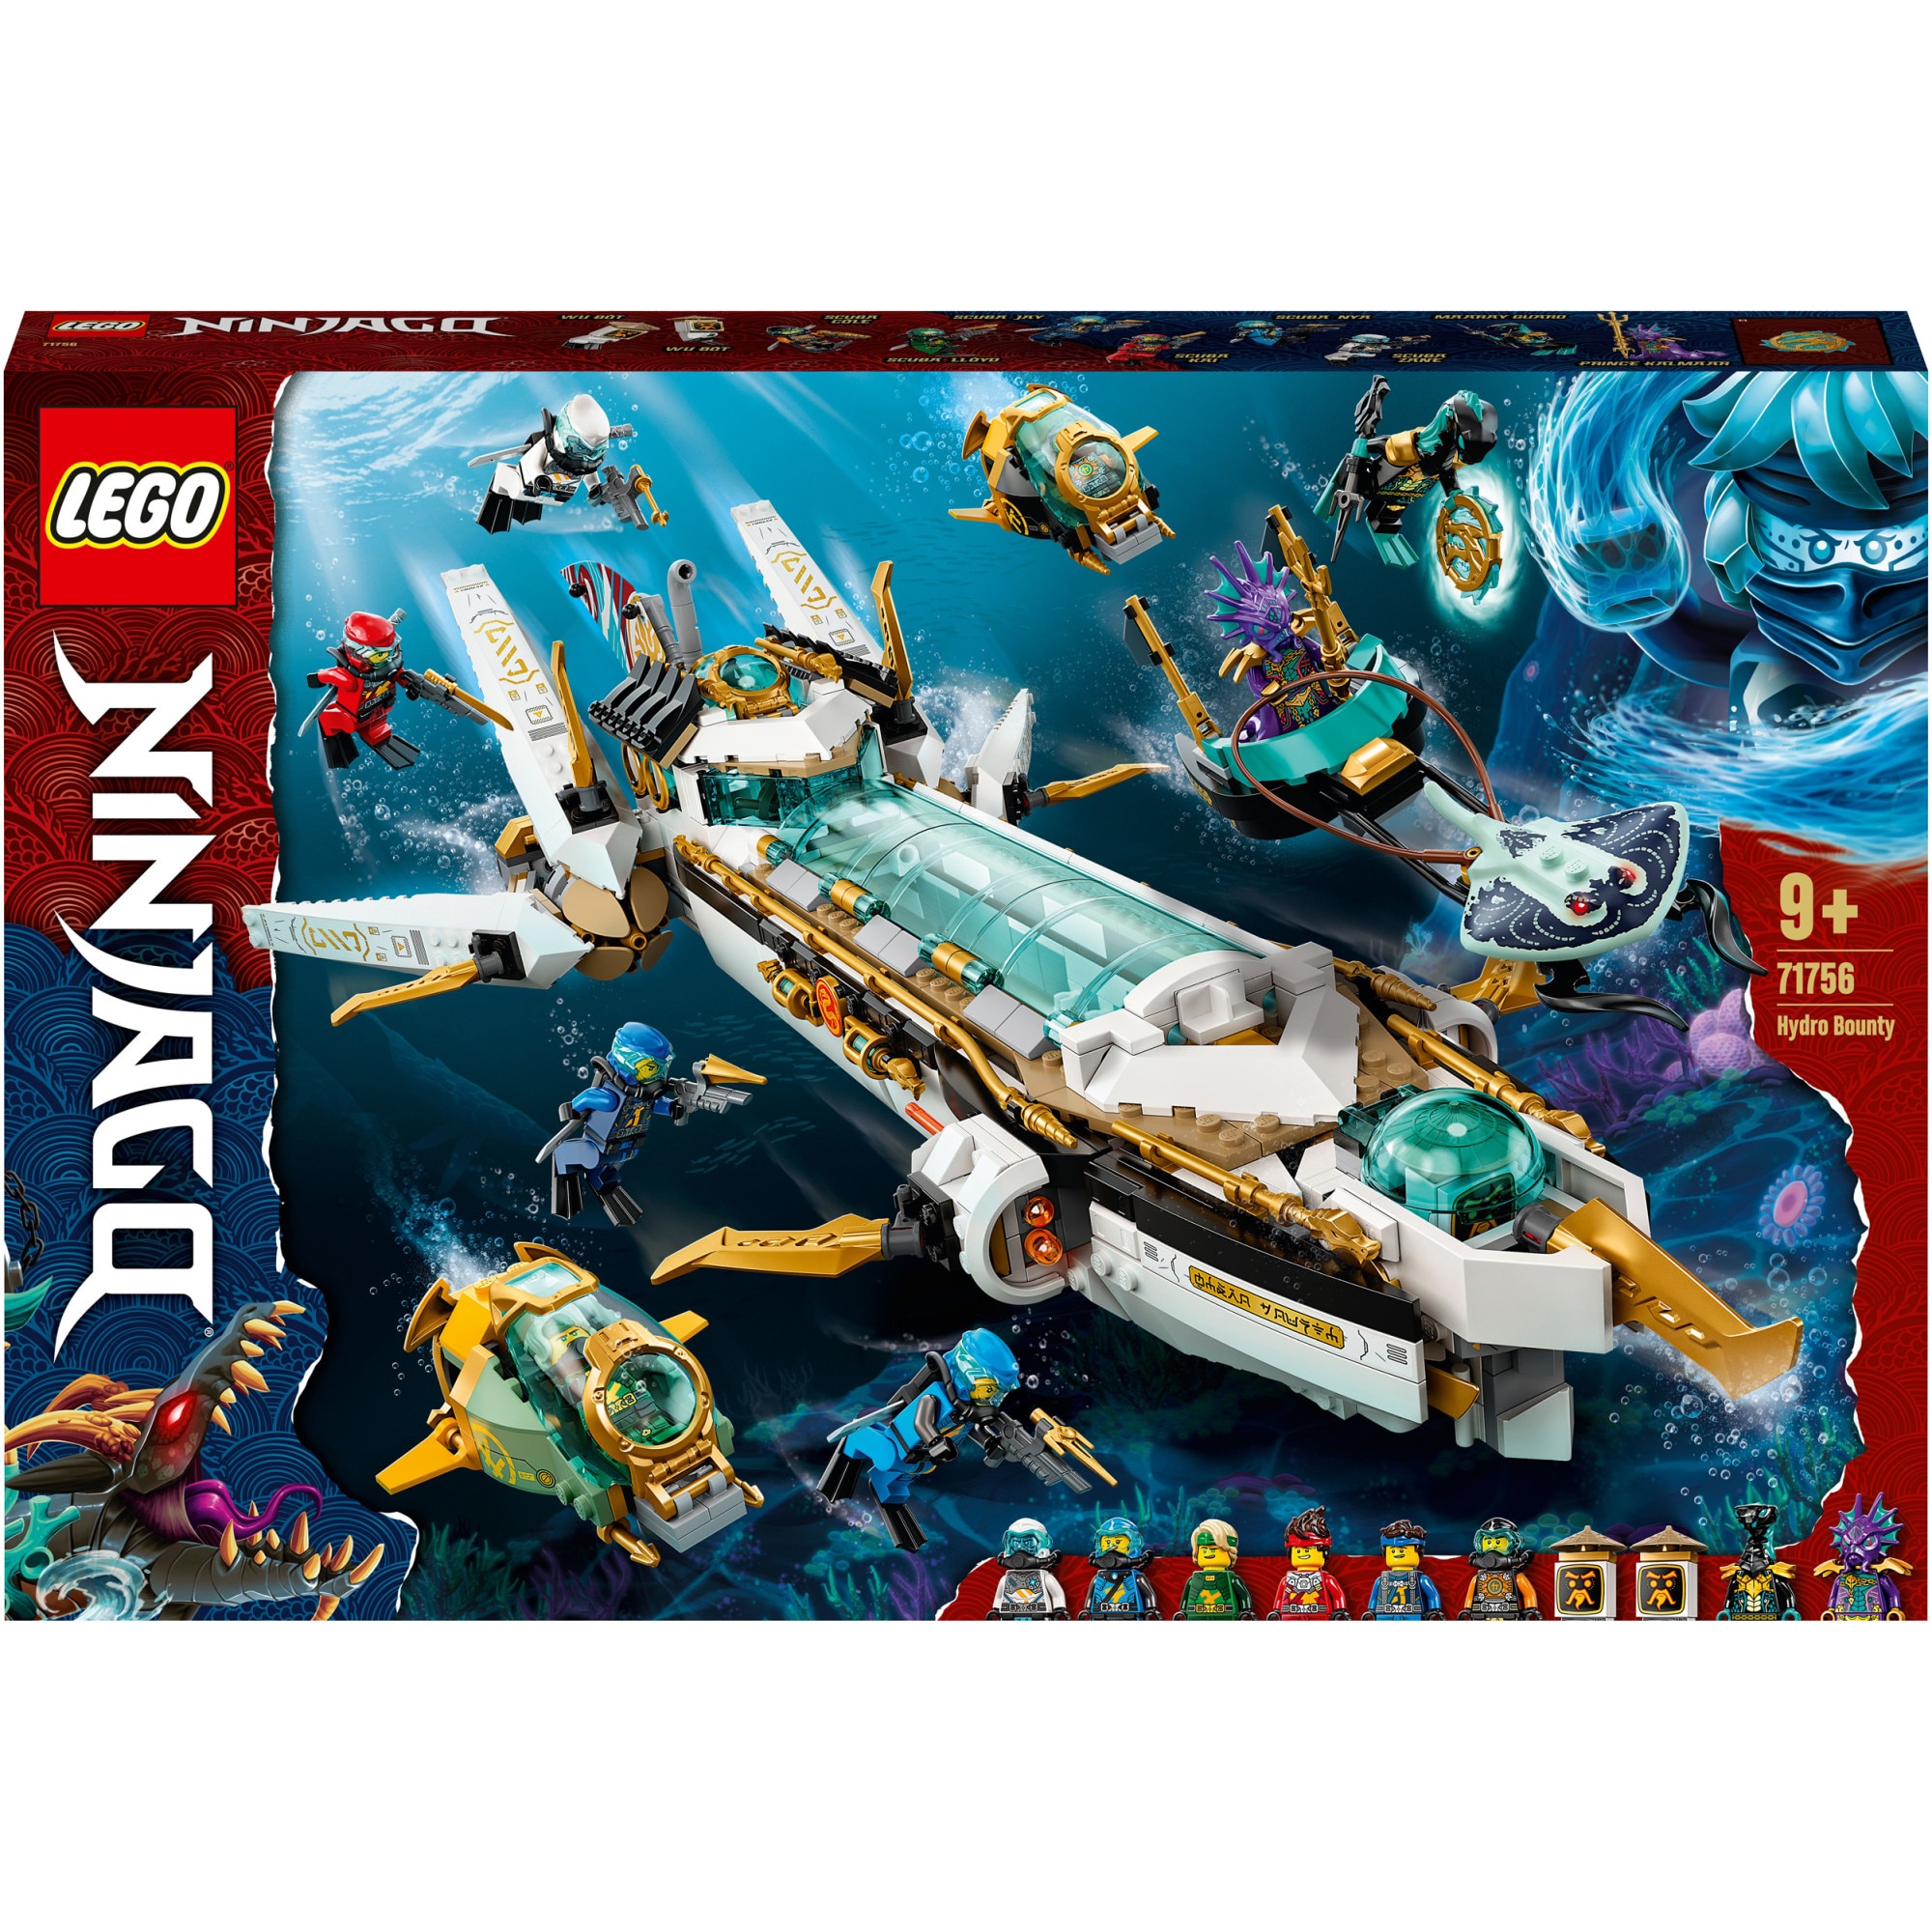 beat Believer questionnaire LEGO NINJAGO - Hydro Bounty 71756, 1159 piese - eMAG.ro